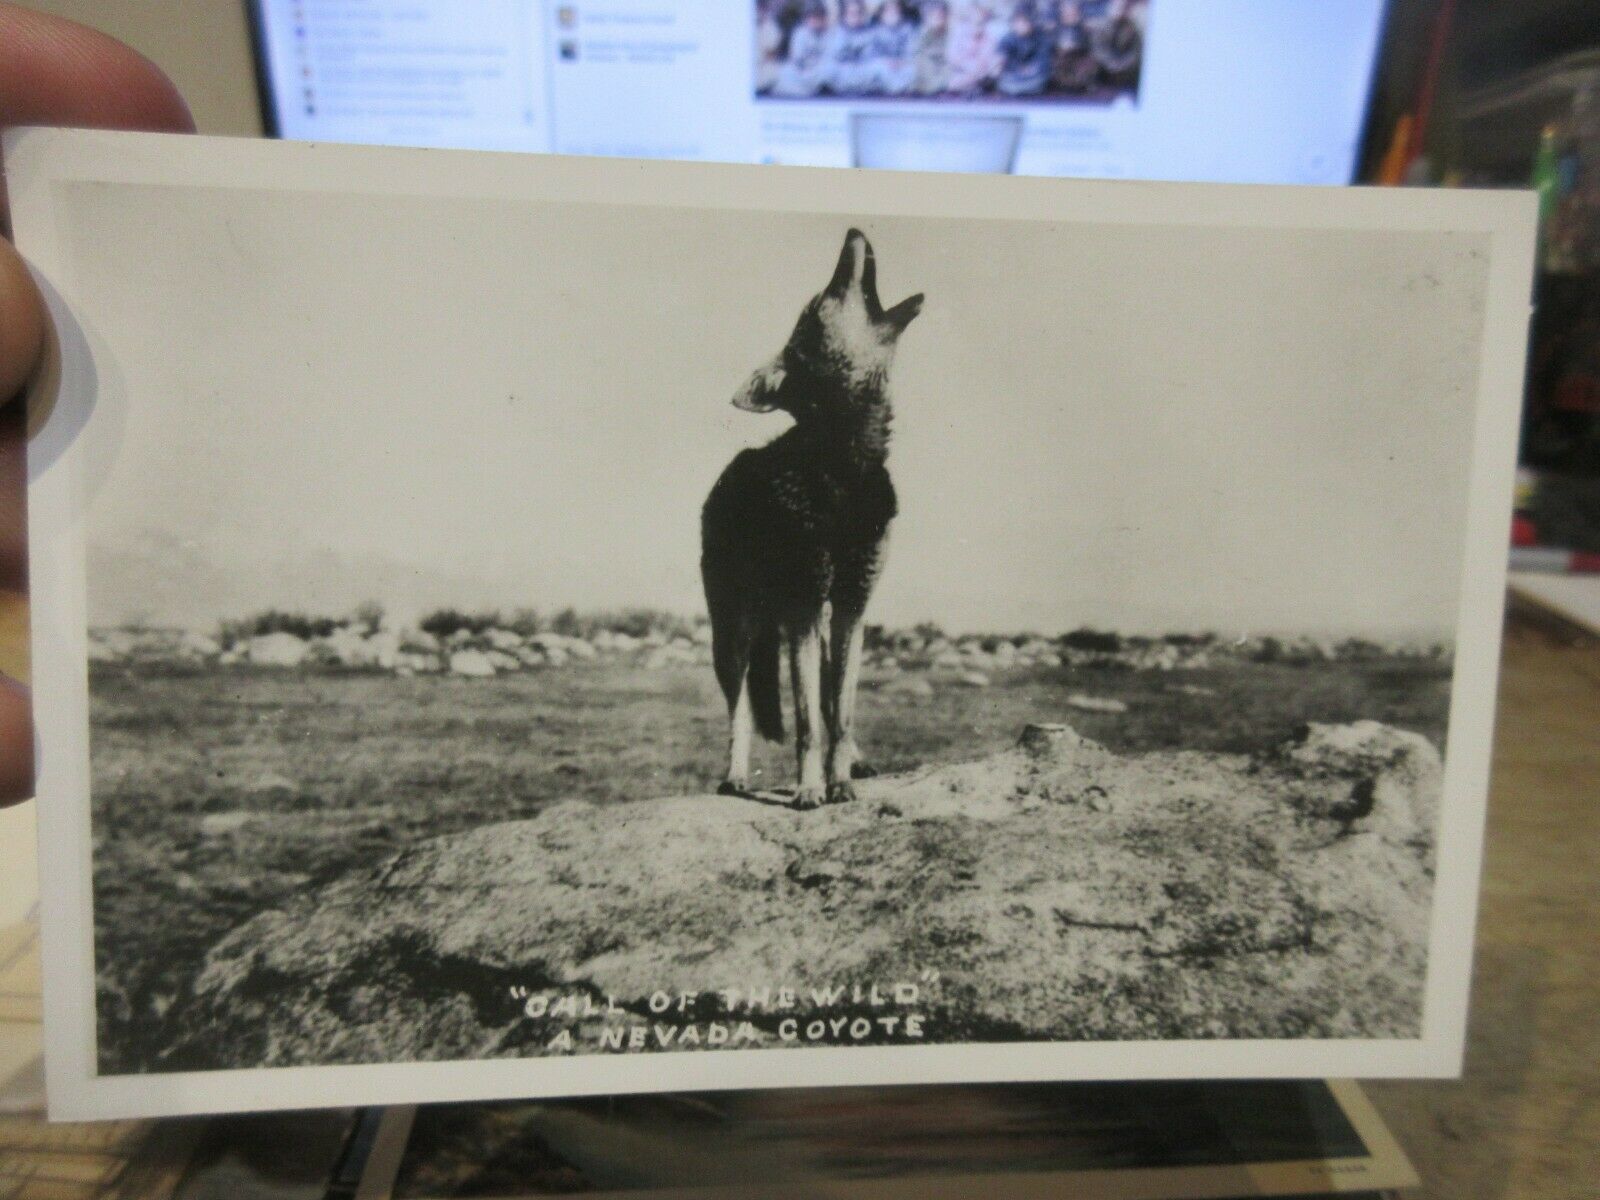 Vintage Old Postcard Nevada Call Of The Wild Coyote Real Photo West Howling Moon